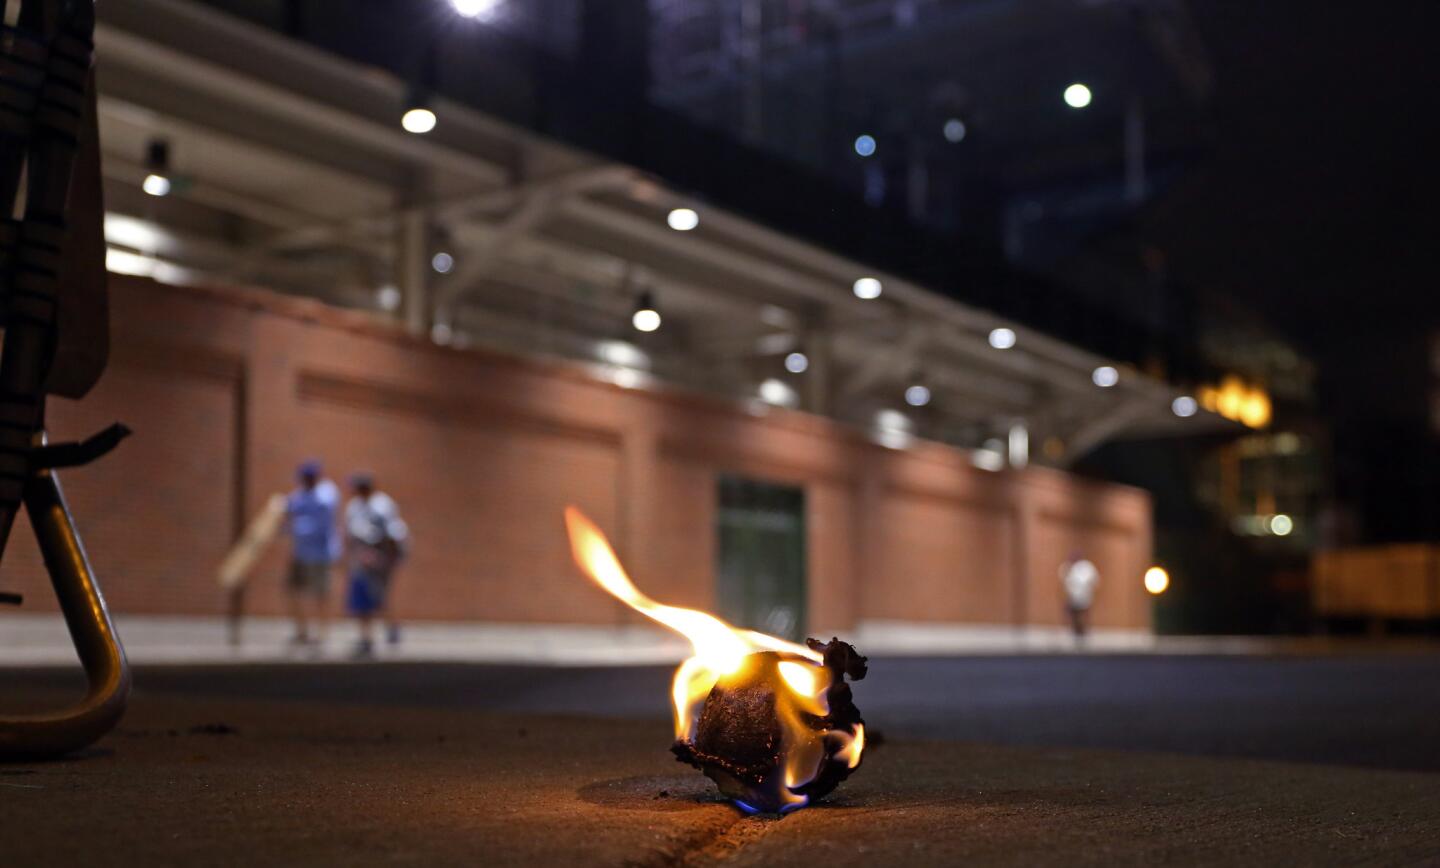 Ballhawks burn a baseball Kris Bryant hit onto Waveland Avenue during batting practice, in what they said was a 17-year-old tradition outside Wrigley Field.